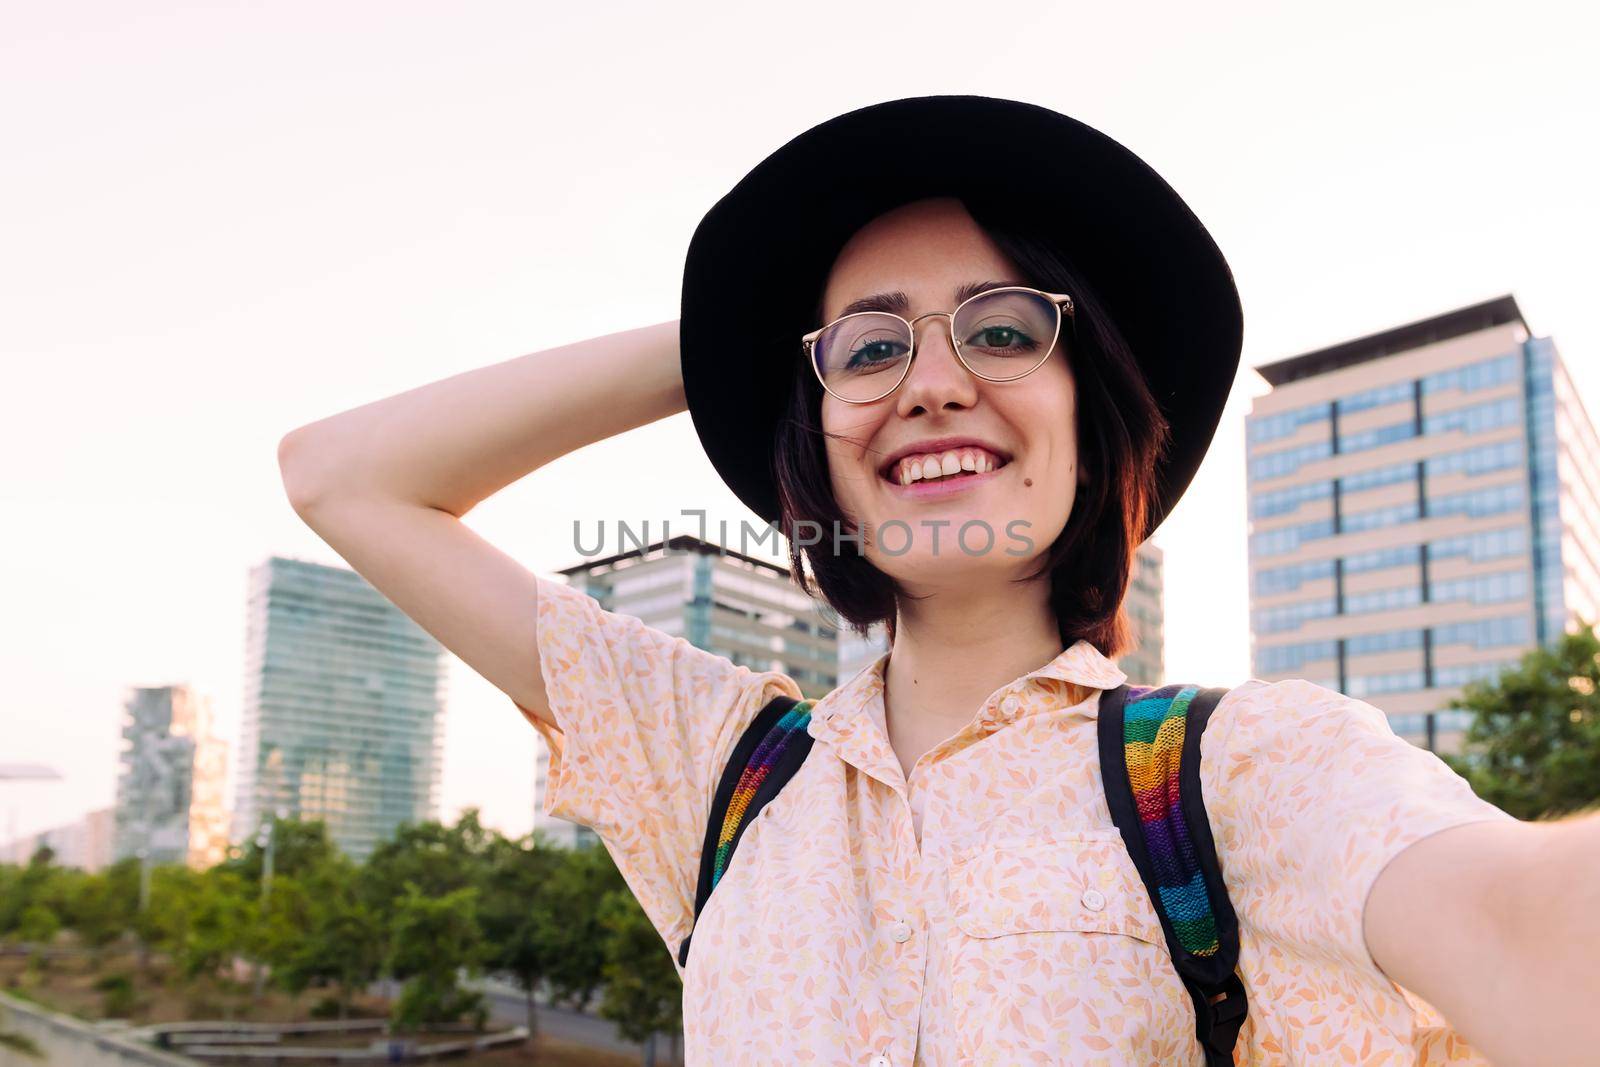 selfie of a beautiful woman with glasses and hat by raulmelldo